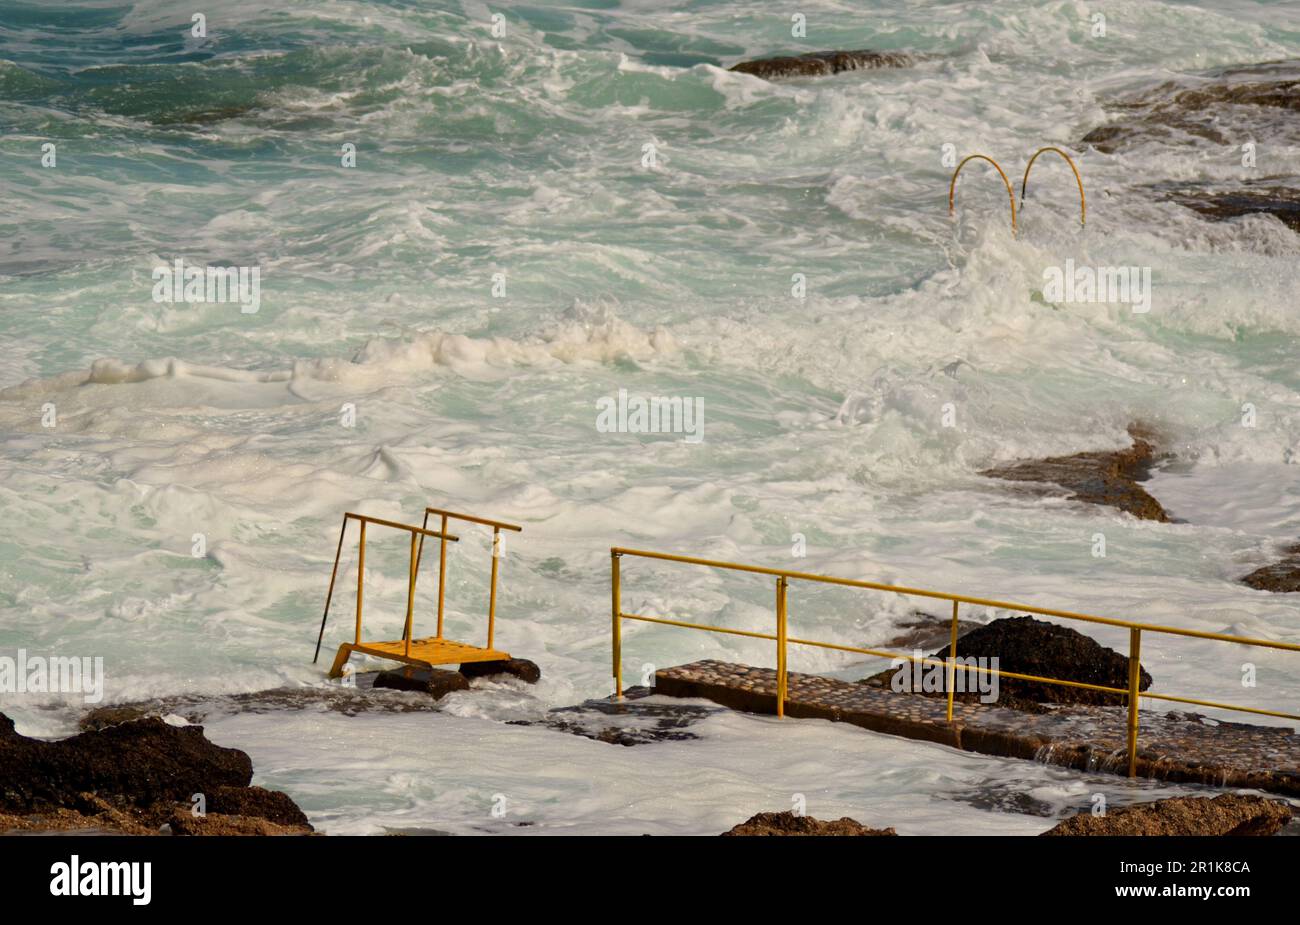 Coast of rocky beach in winter. Strong white sea waves, storm, umbrellas closed. For each umbrella there is a concrete platform. Stock Photo